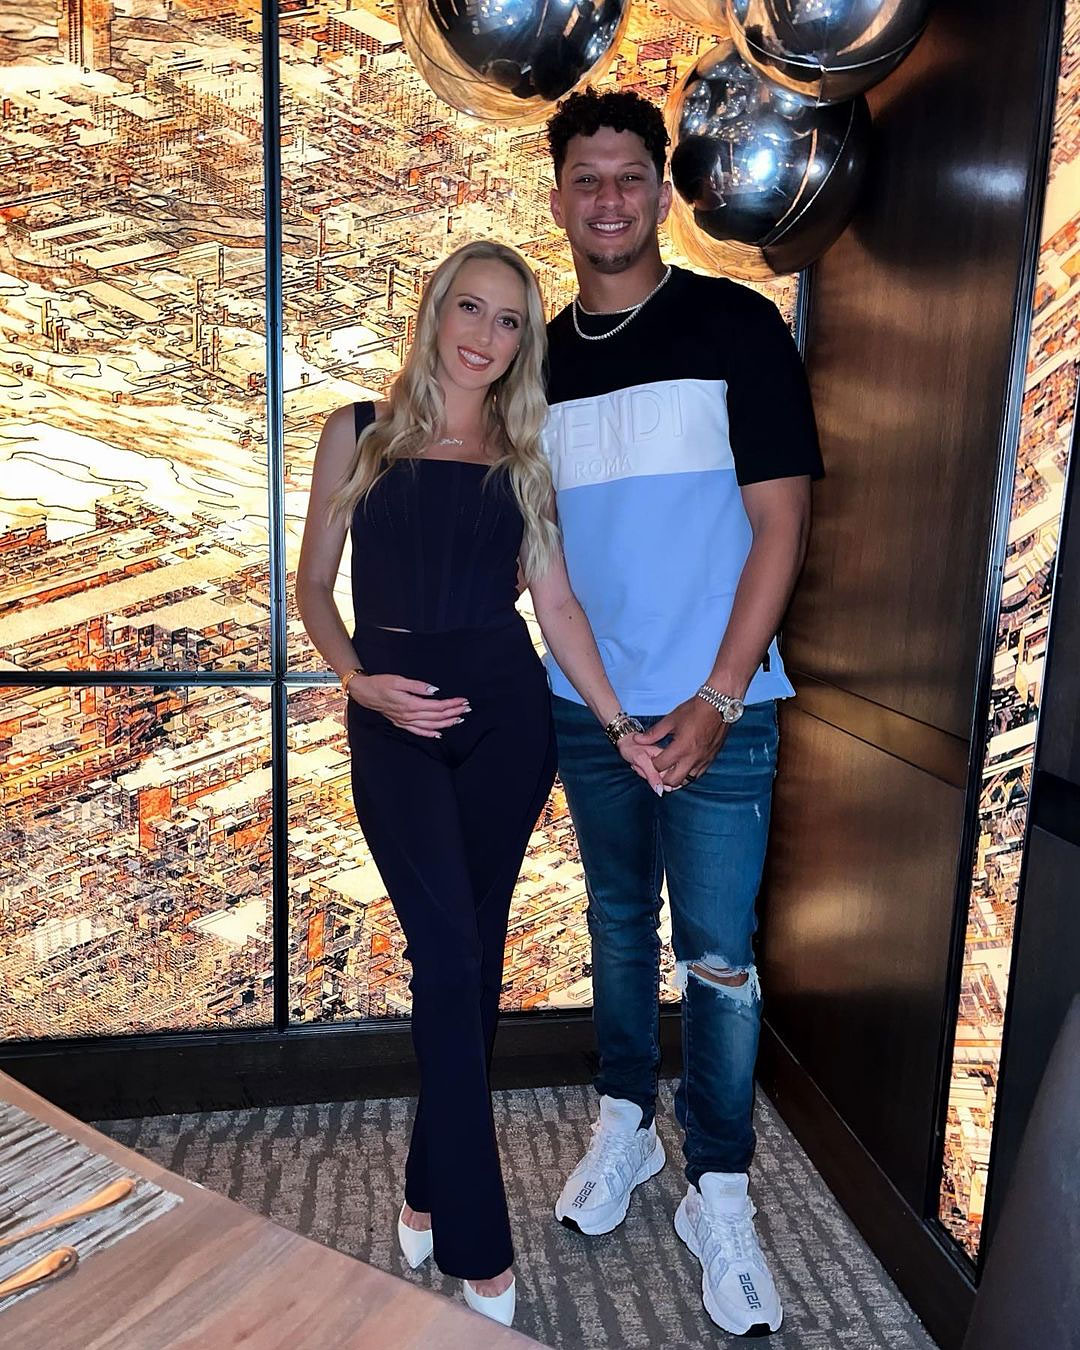 Chiefs' Patrick Mahomes, Wife Brittany Say They're Expecting a Boy